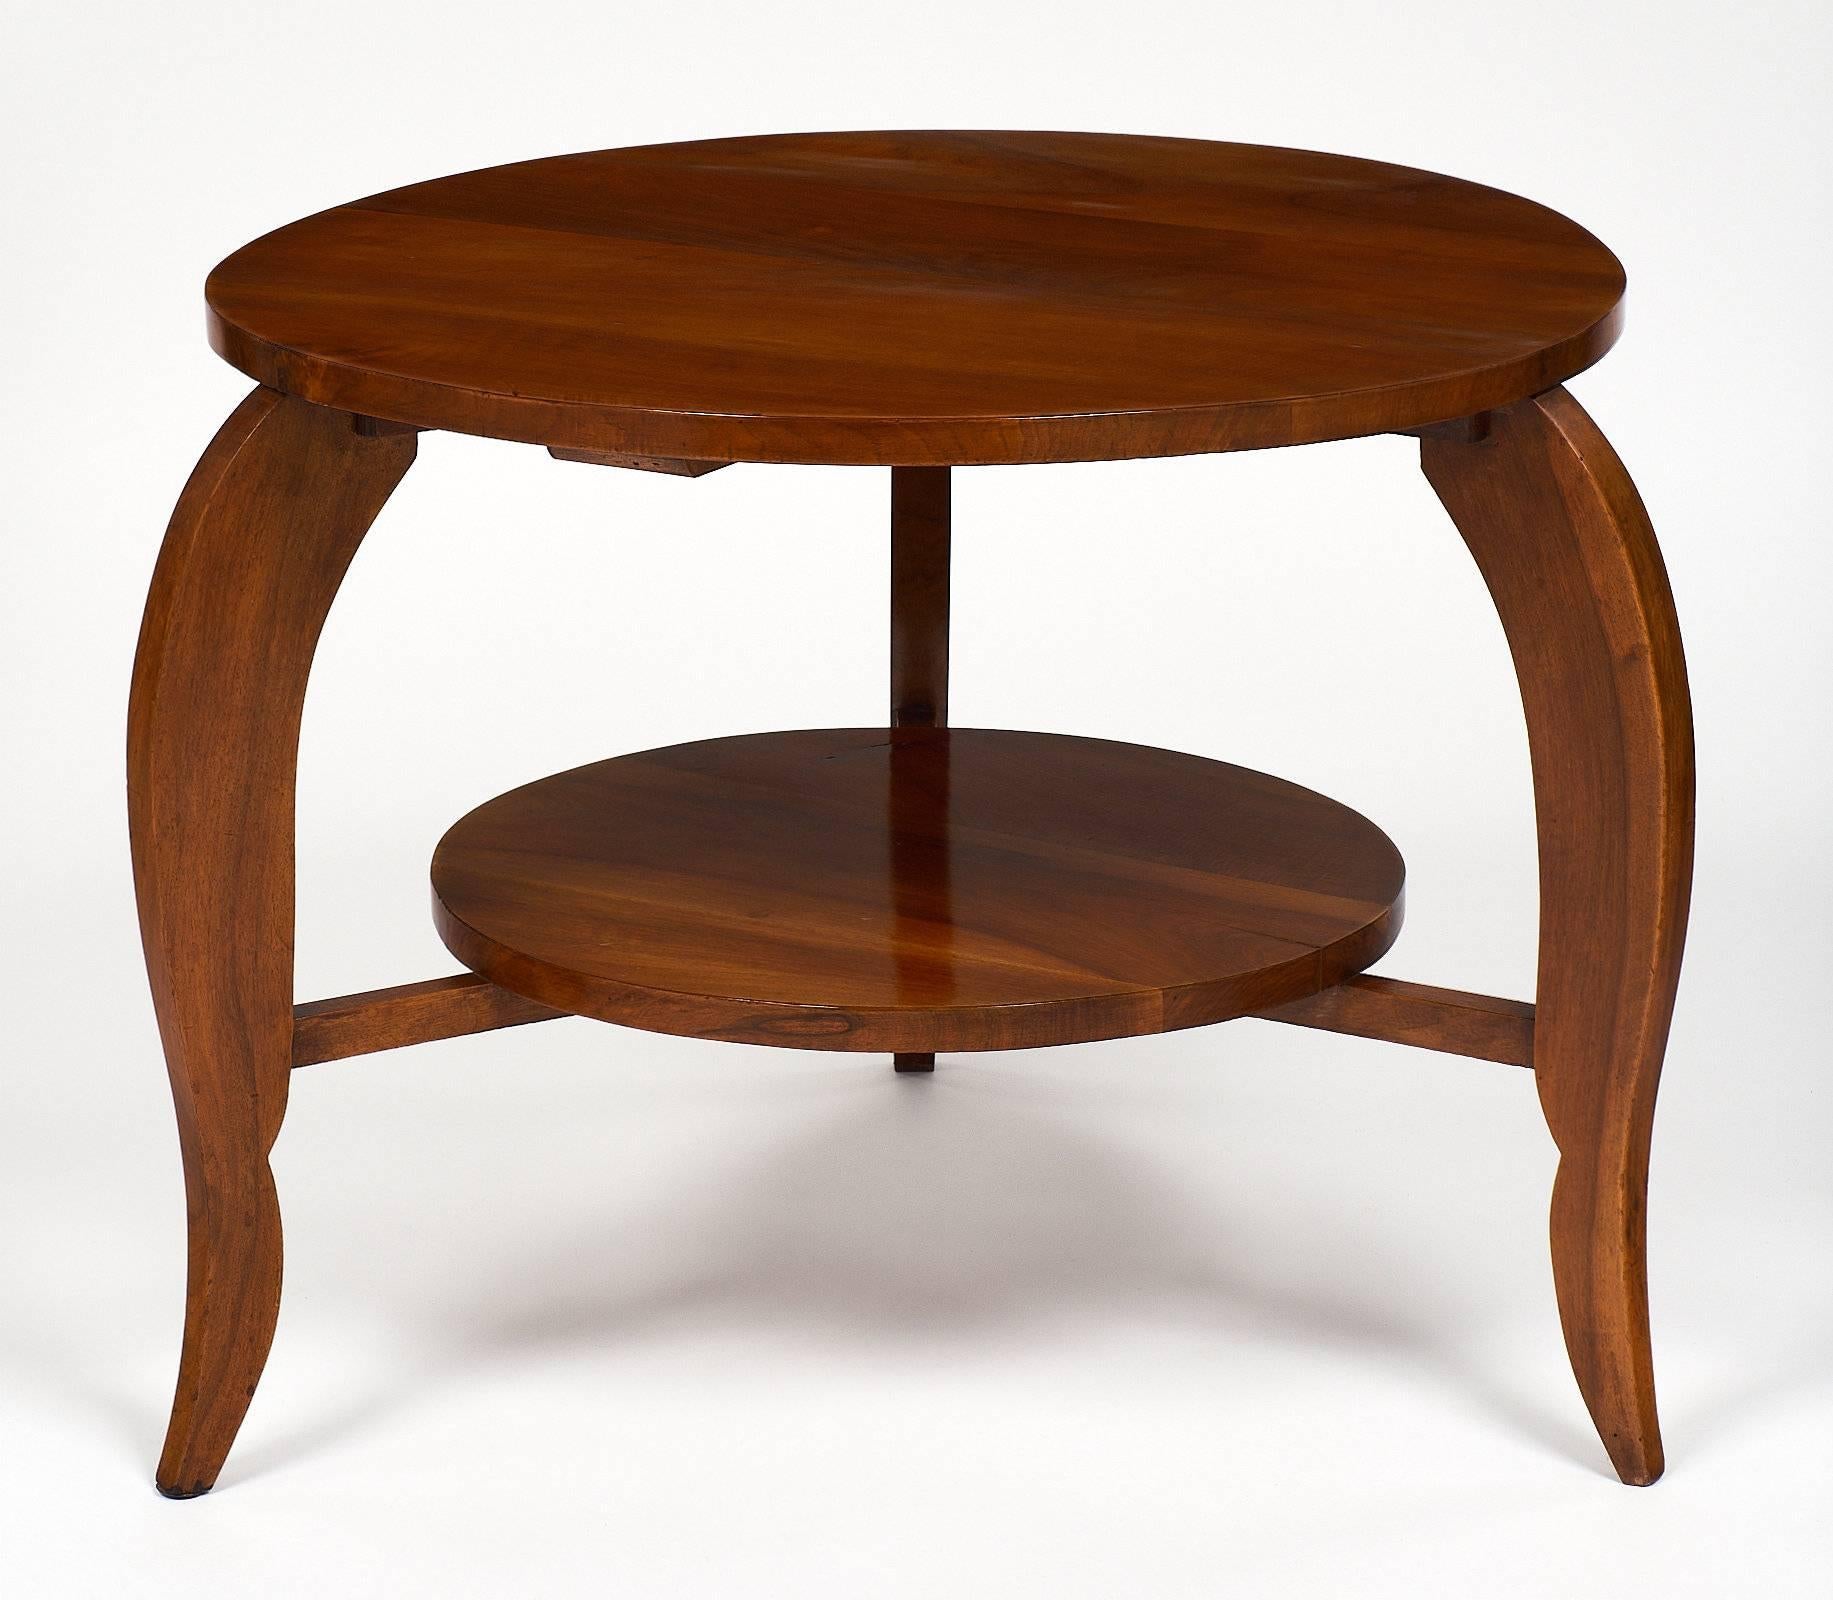 French Art Deco period “gueridon” with walnut veneer; three cabriole legs and a bottom shelf. We loved the dynamic lines of this versatile round side table; and the honey-toned color of the walnut; finished with a French polish.